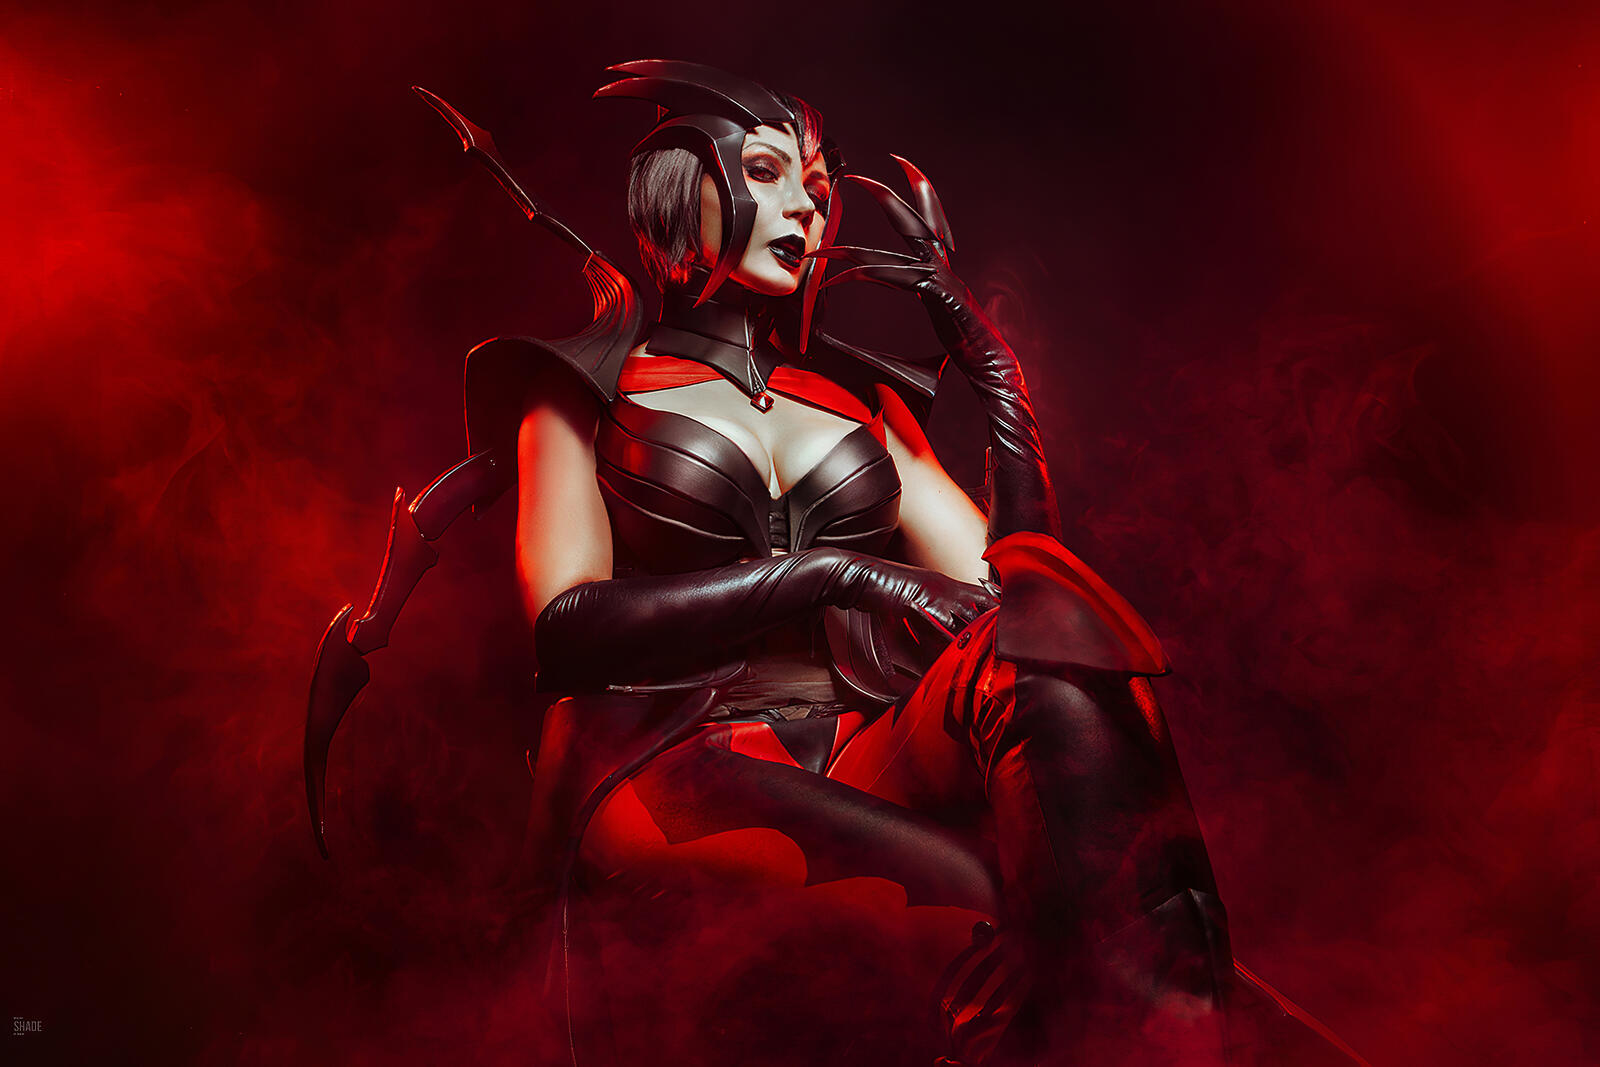 Wallpapers League Of Legends games cosplay on the desktop